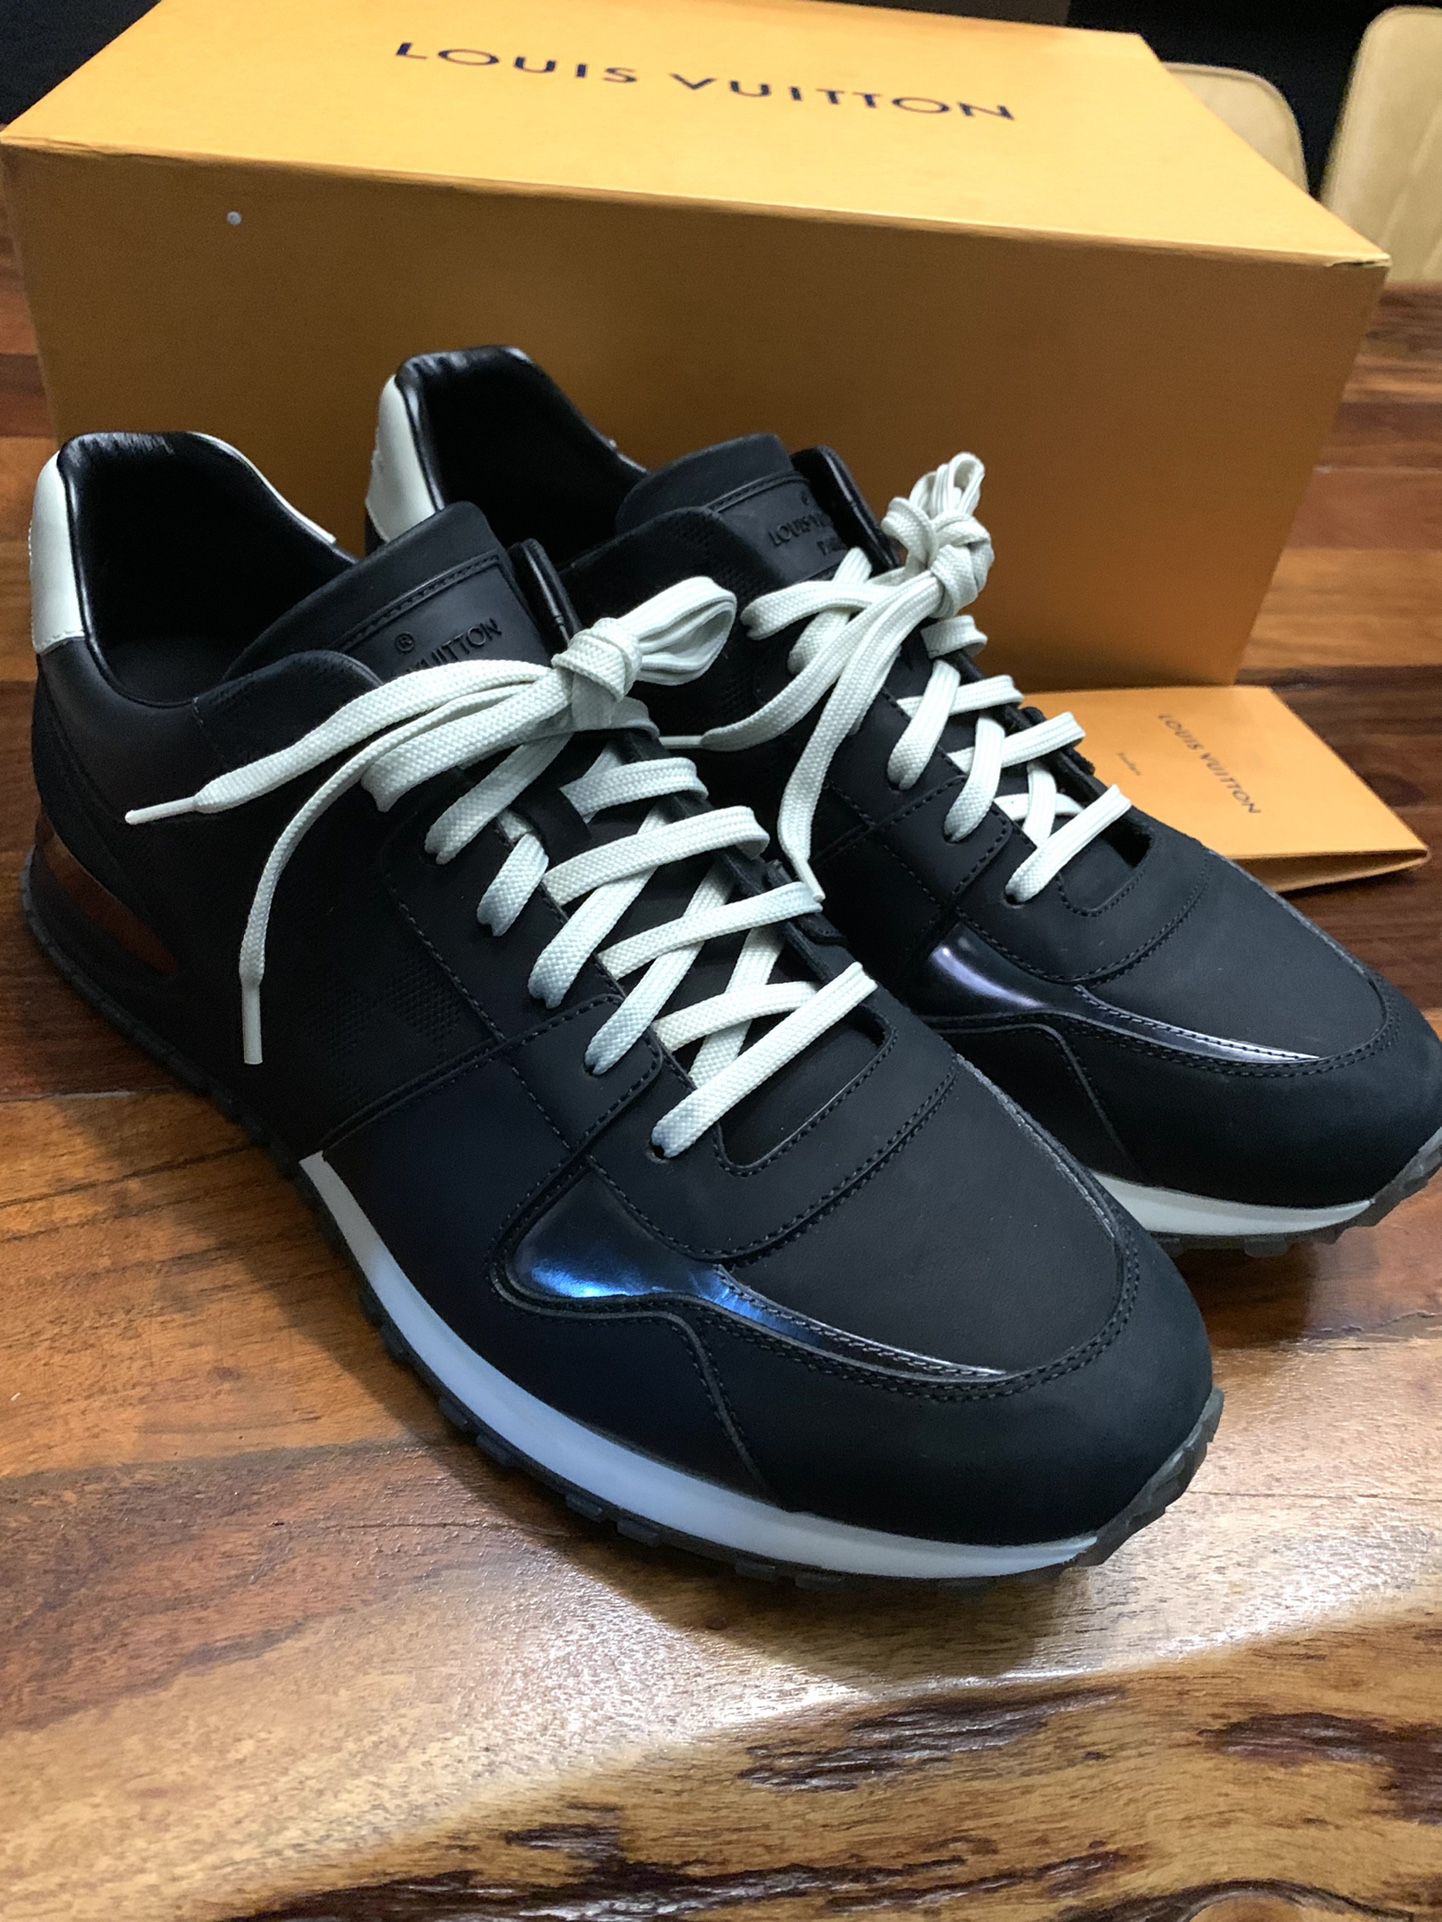 Louis Vuitton Runaway Sneakers Size 10 With Box for Sale in San